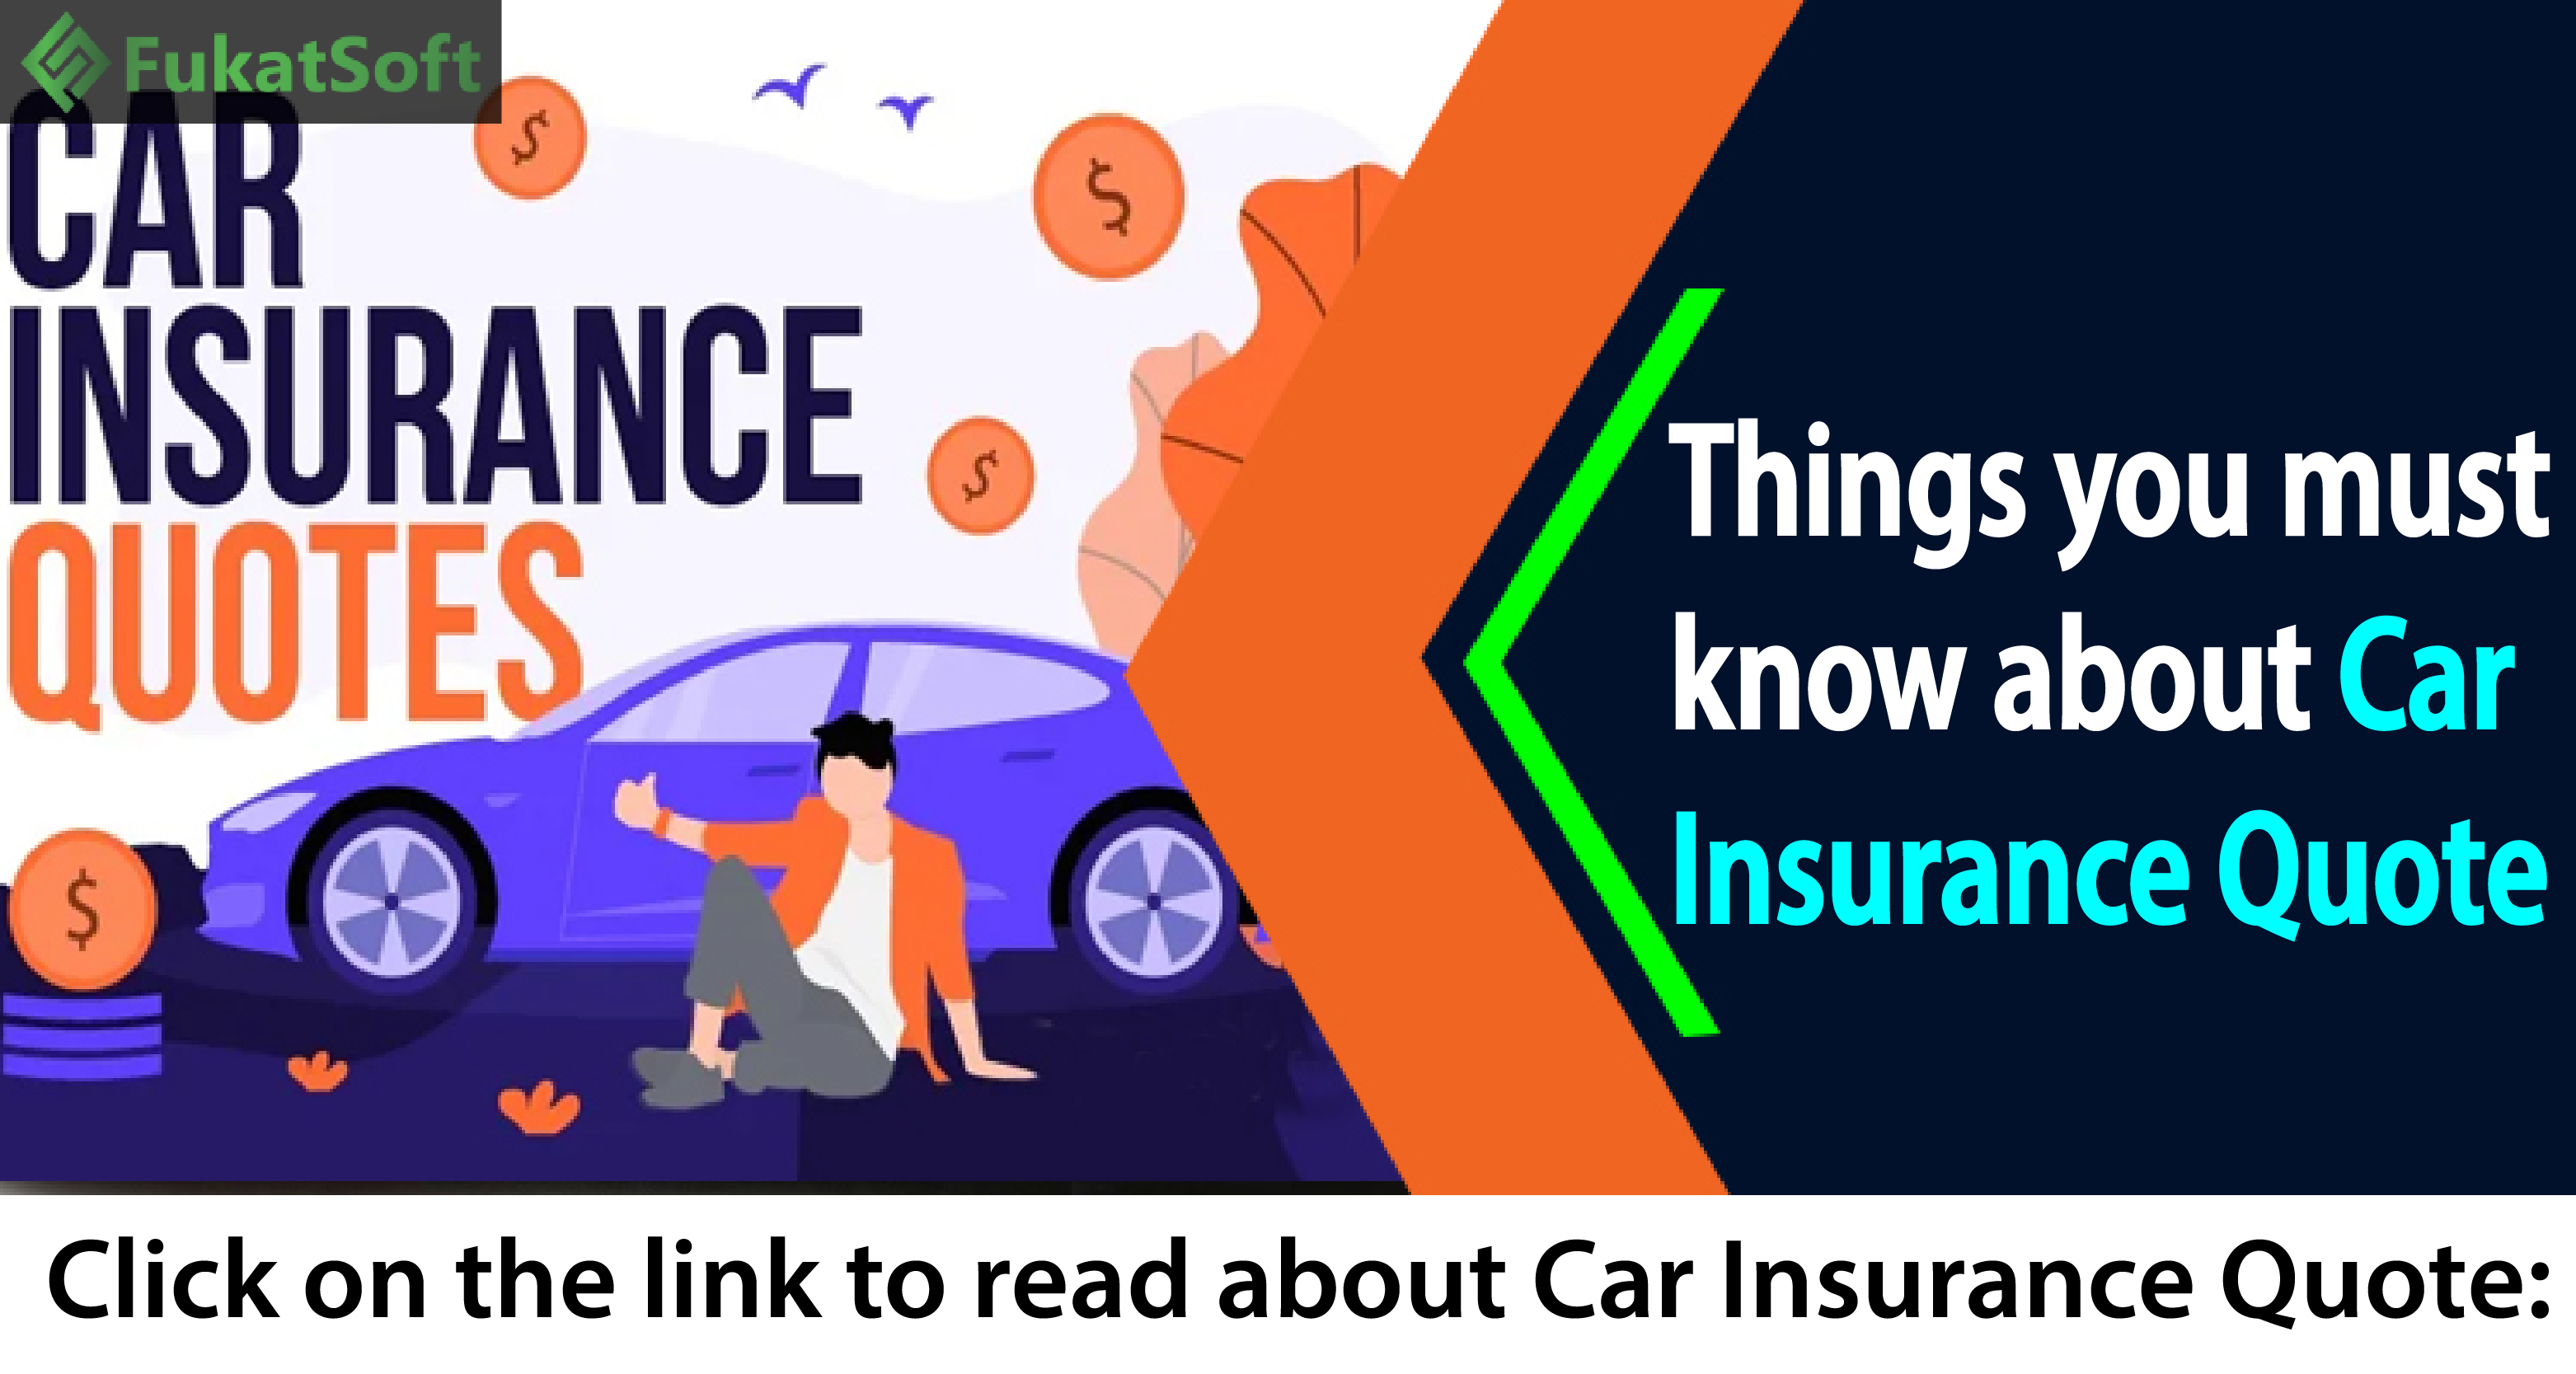 6 Basic things you need to know about CAR INSURANCE QUOTE